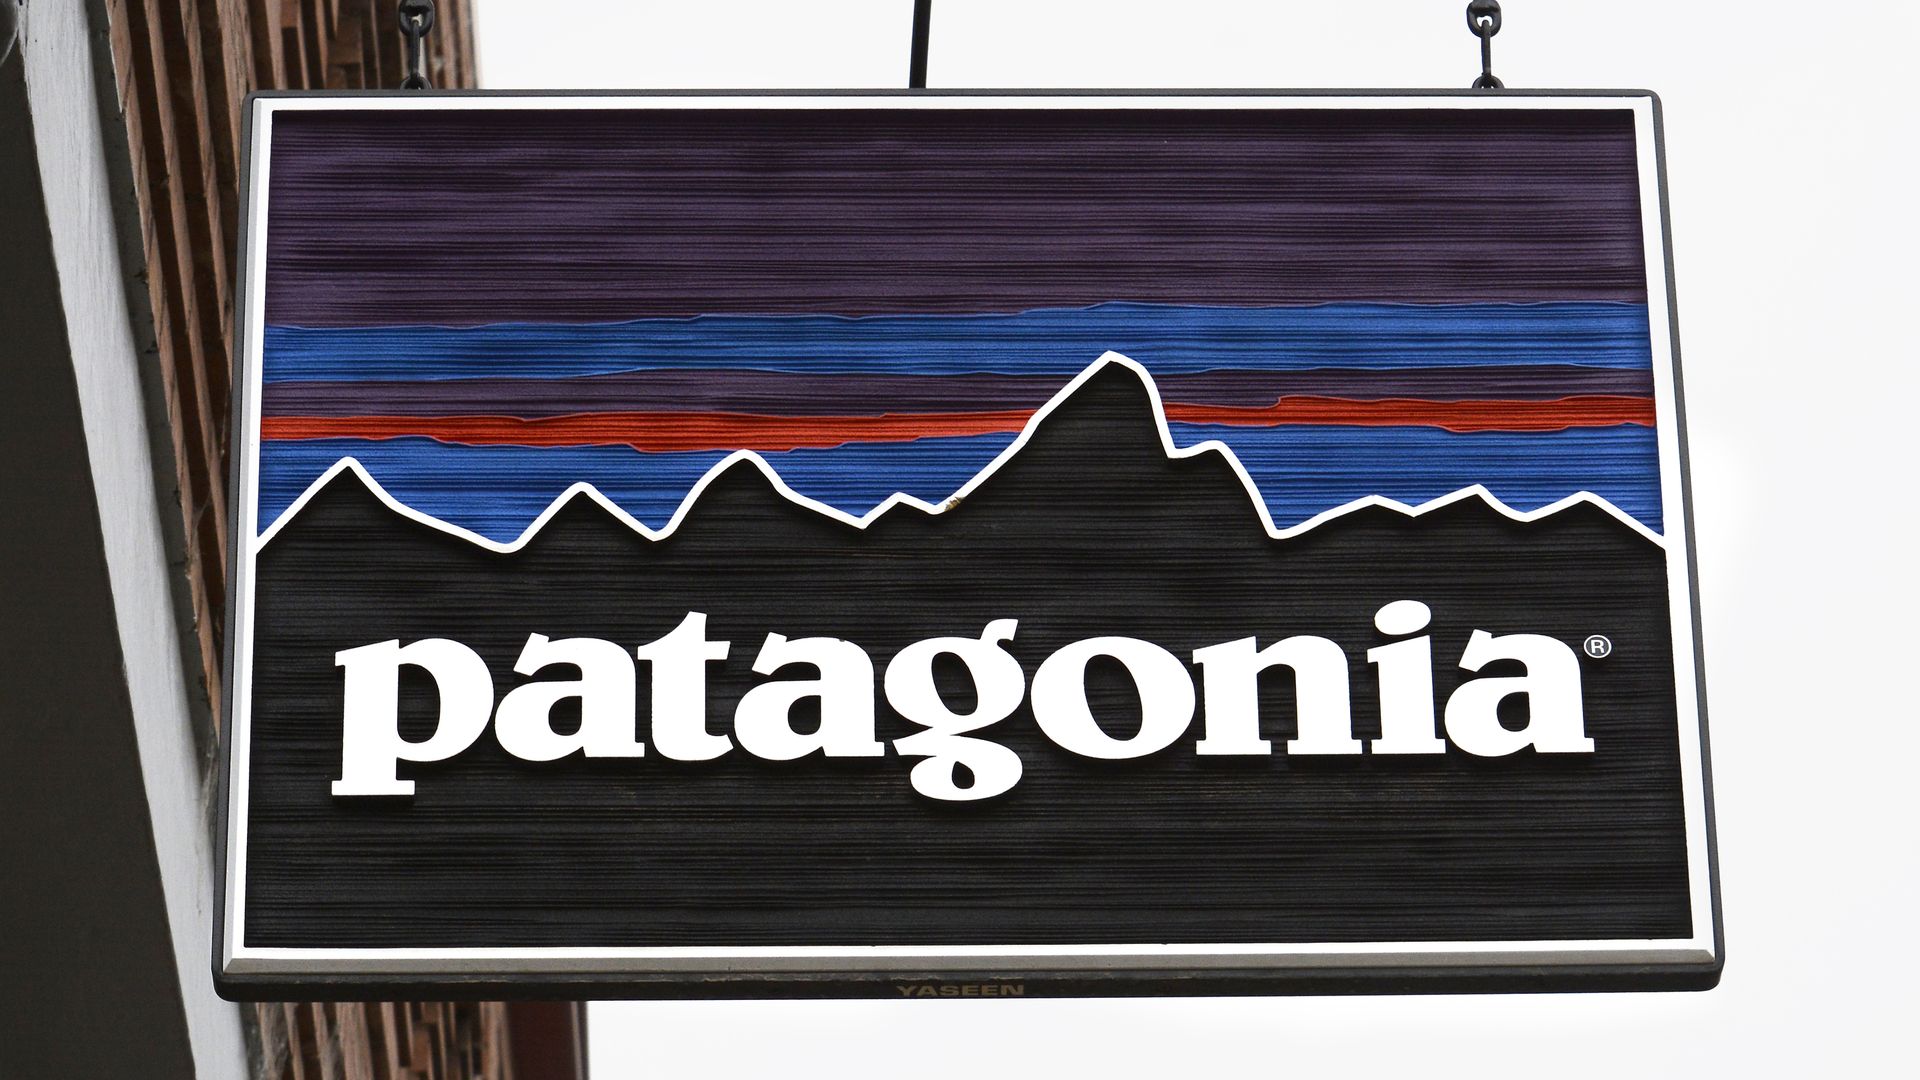 A small store advertising Patagonia, spelled out in white letters, hangs from the side of a building.